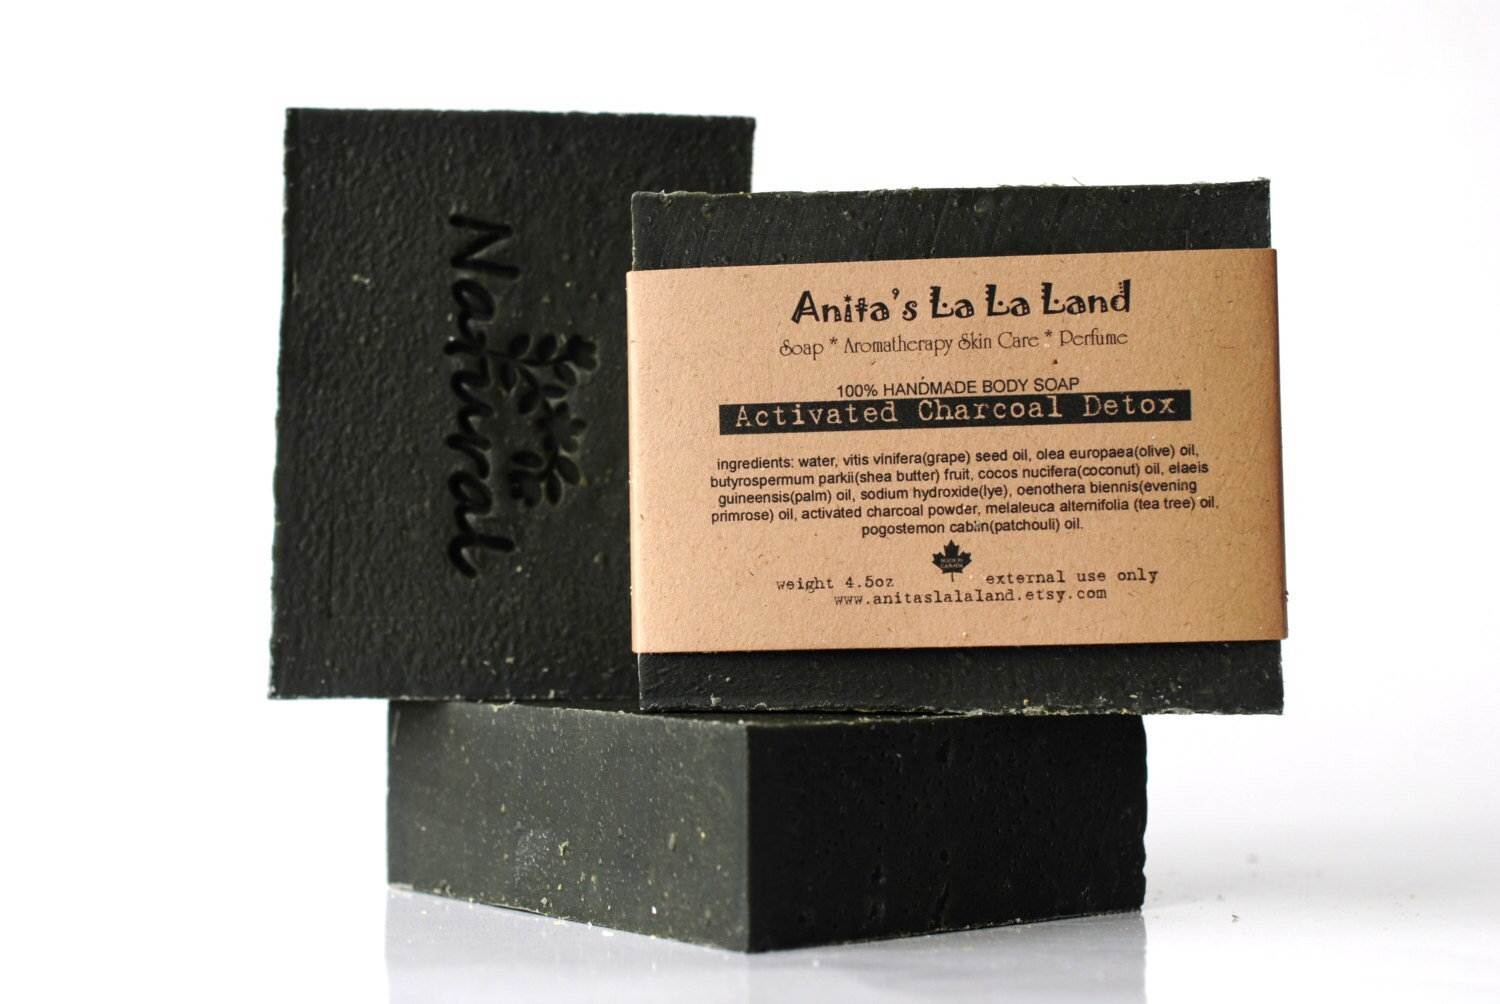 ACTIVATED CHARCOAL DETOX soap - with evening primrose oil and tea tree oil, cold process soap, vegan - AnitasLaLaLand